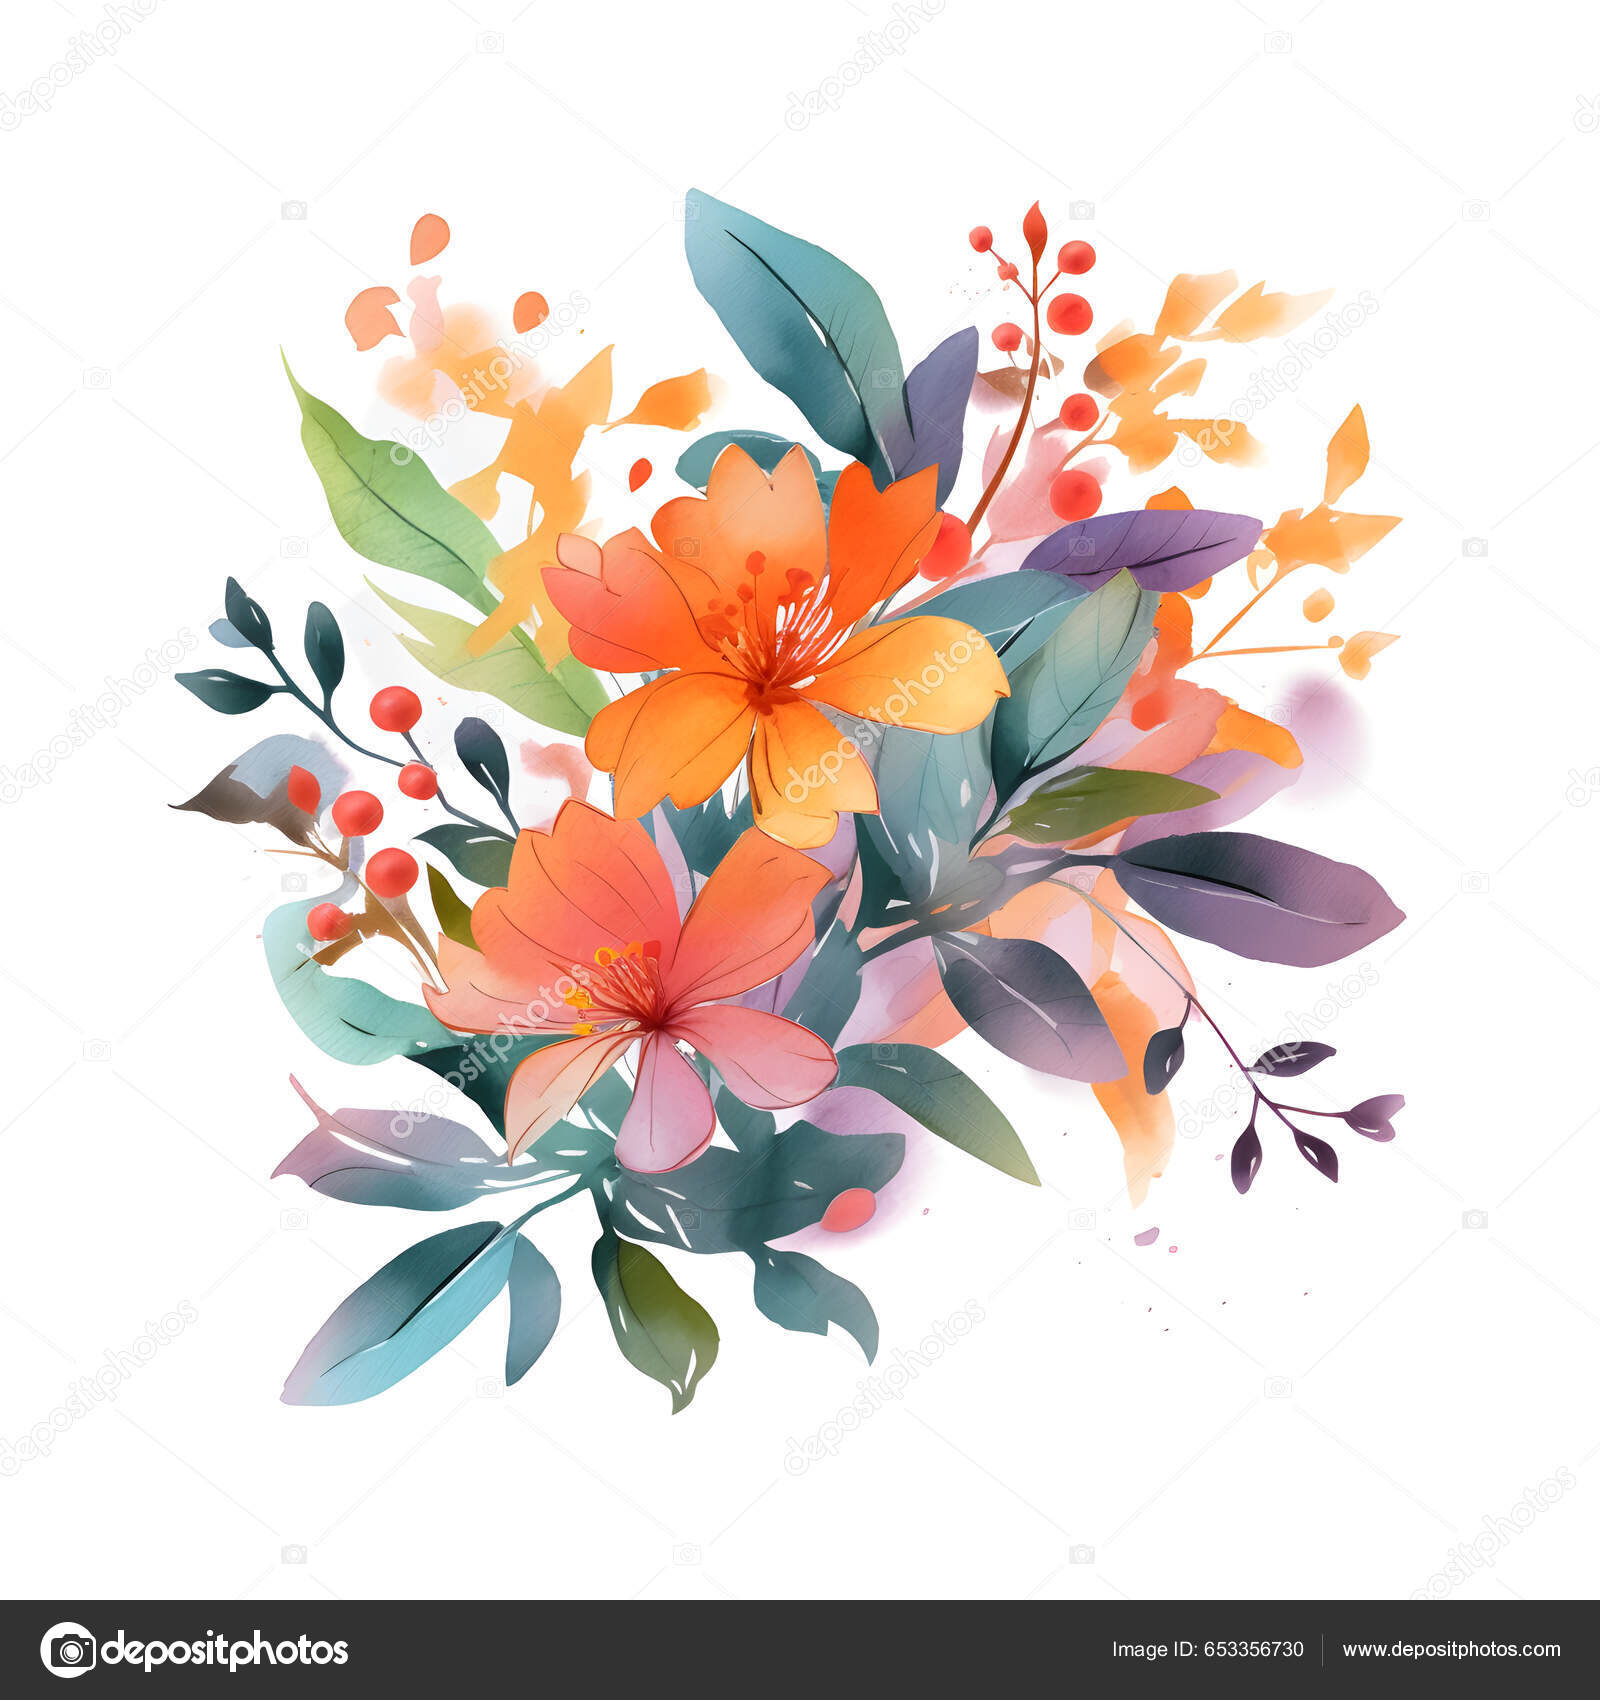 Watercolor flowers Stock Photos, Royalty Free Watercolor flowers Images |  Depositphotos